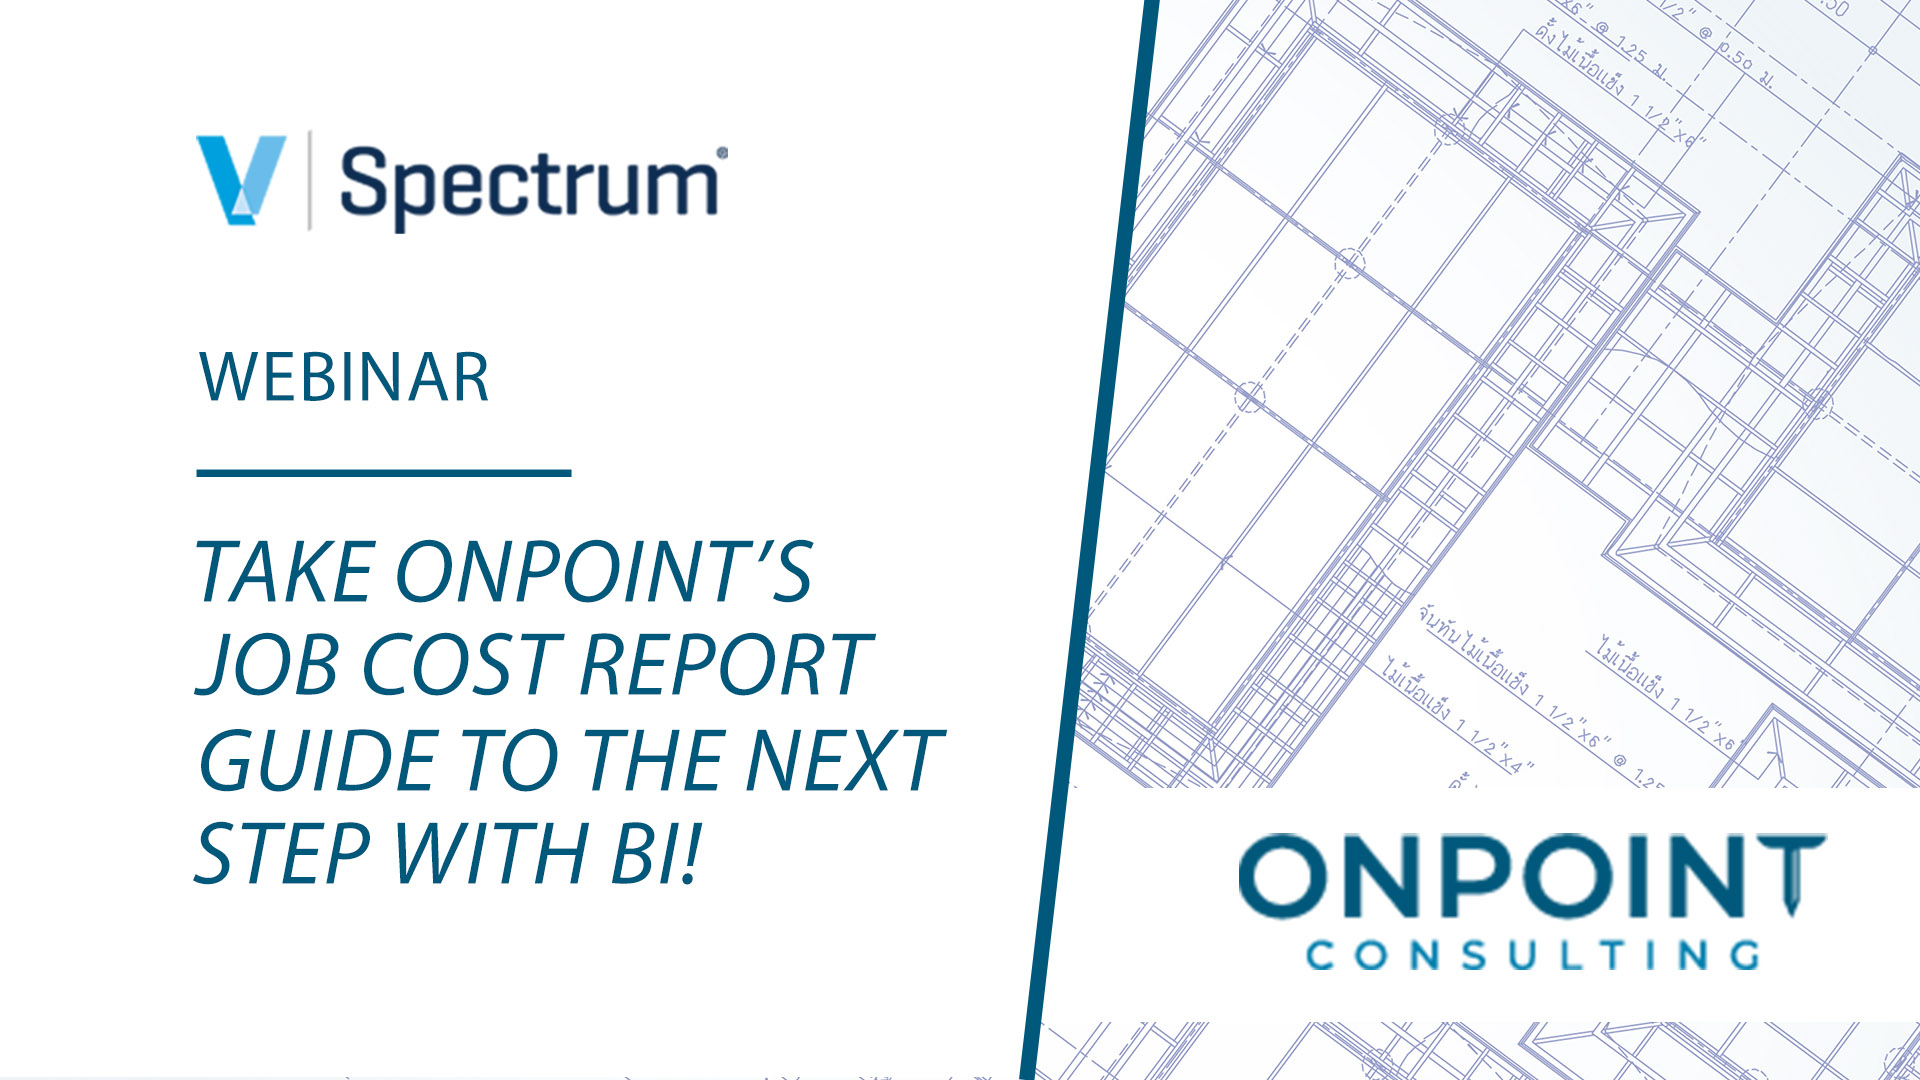 Take OnPoint's Job Cost Report Guide to the next step with BI!